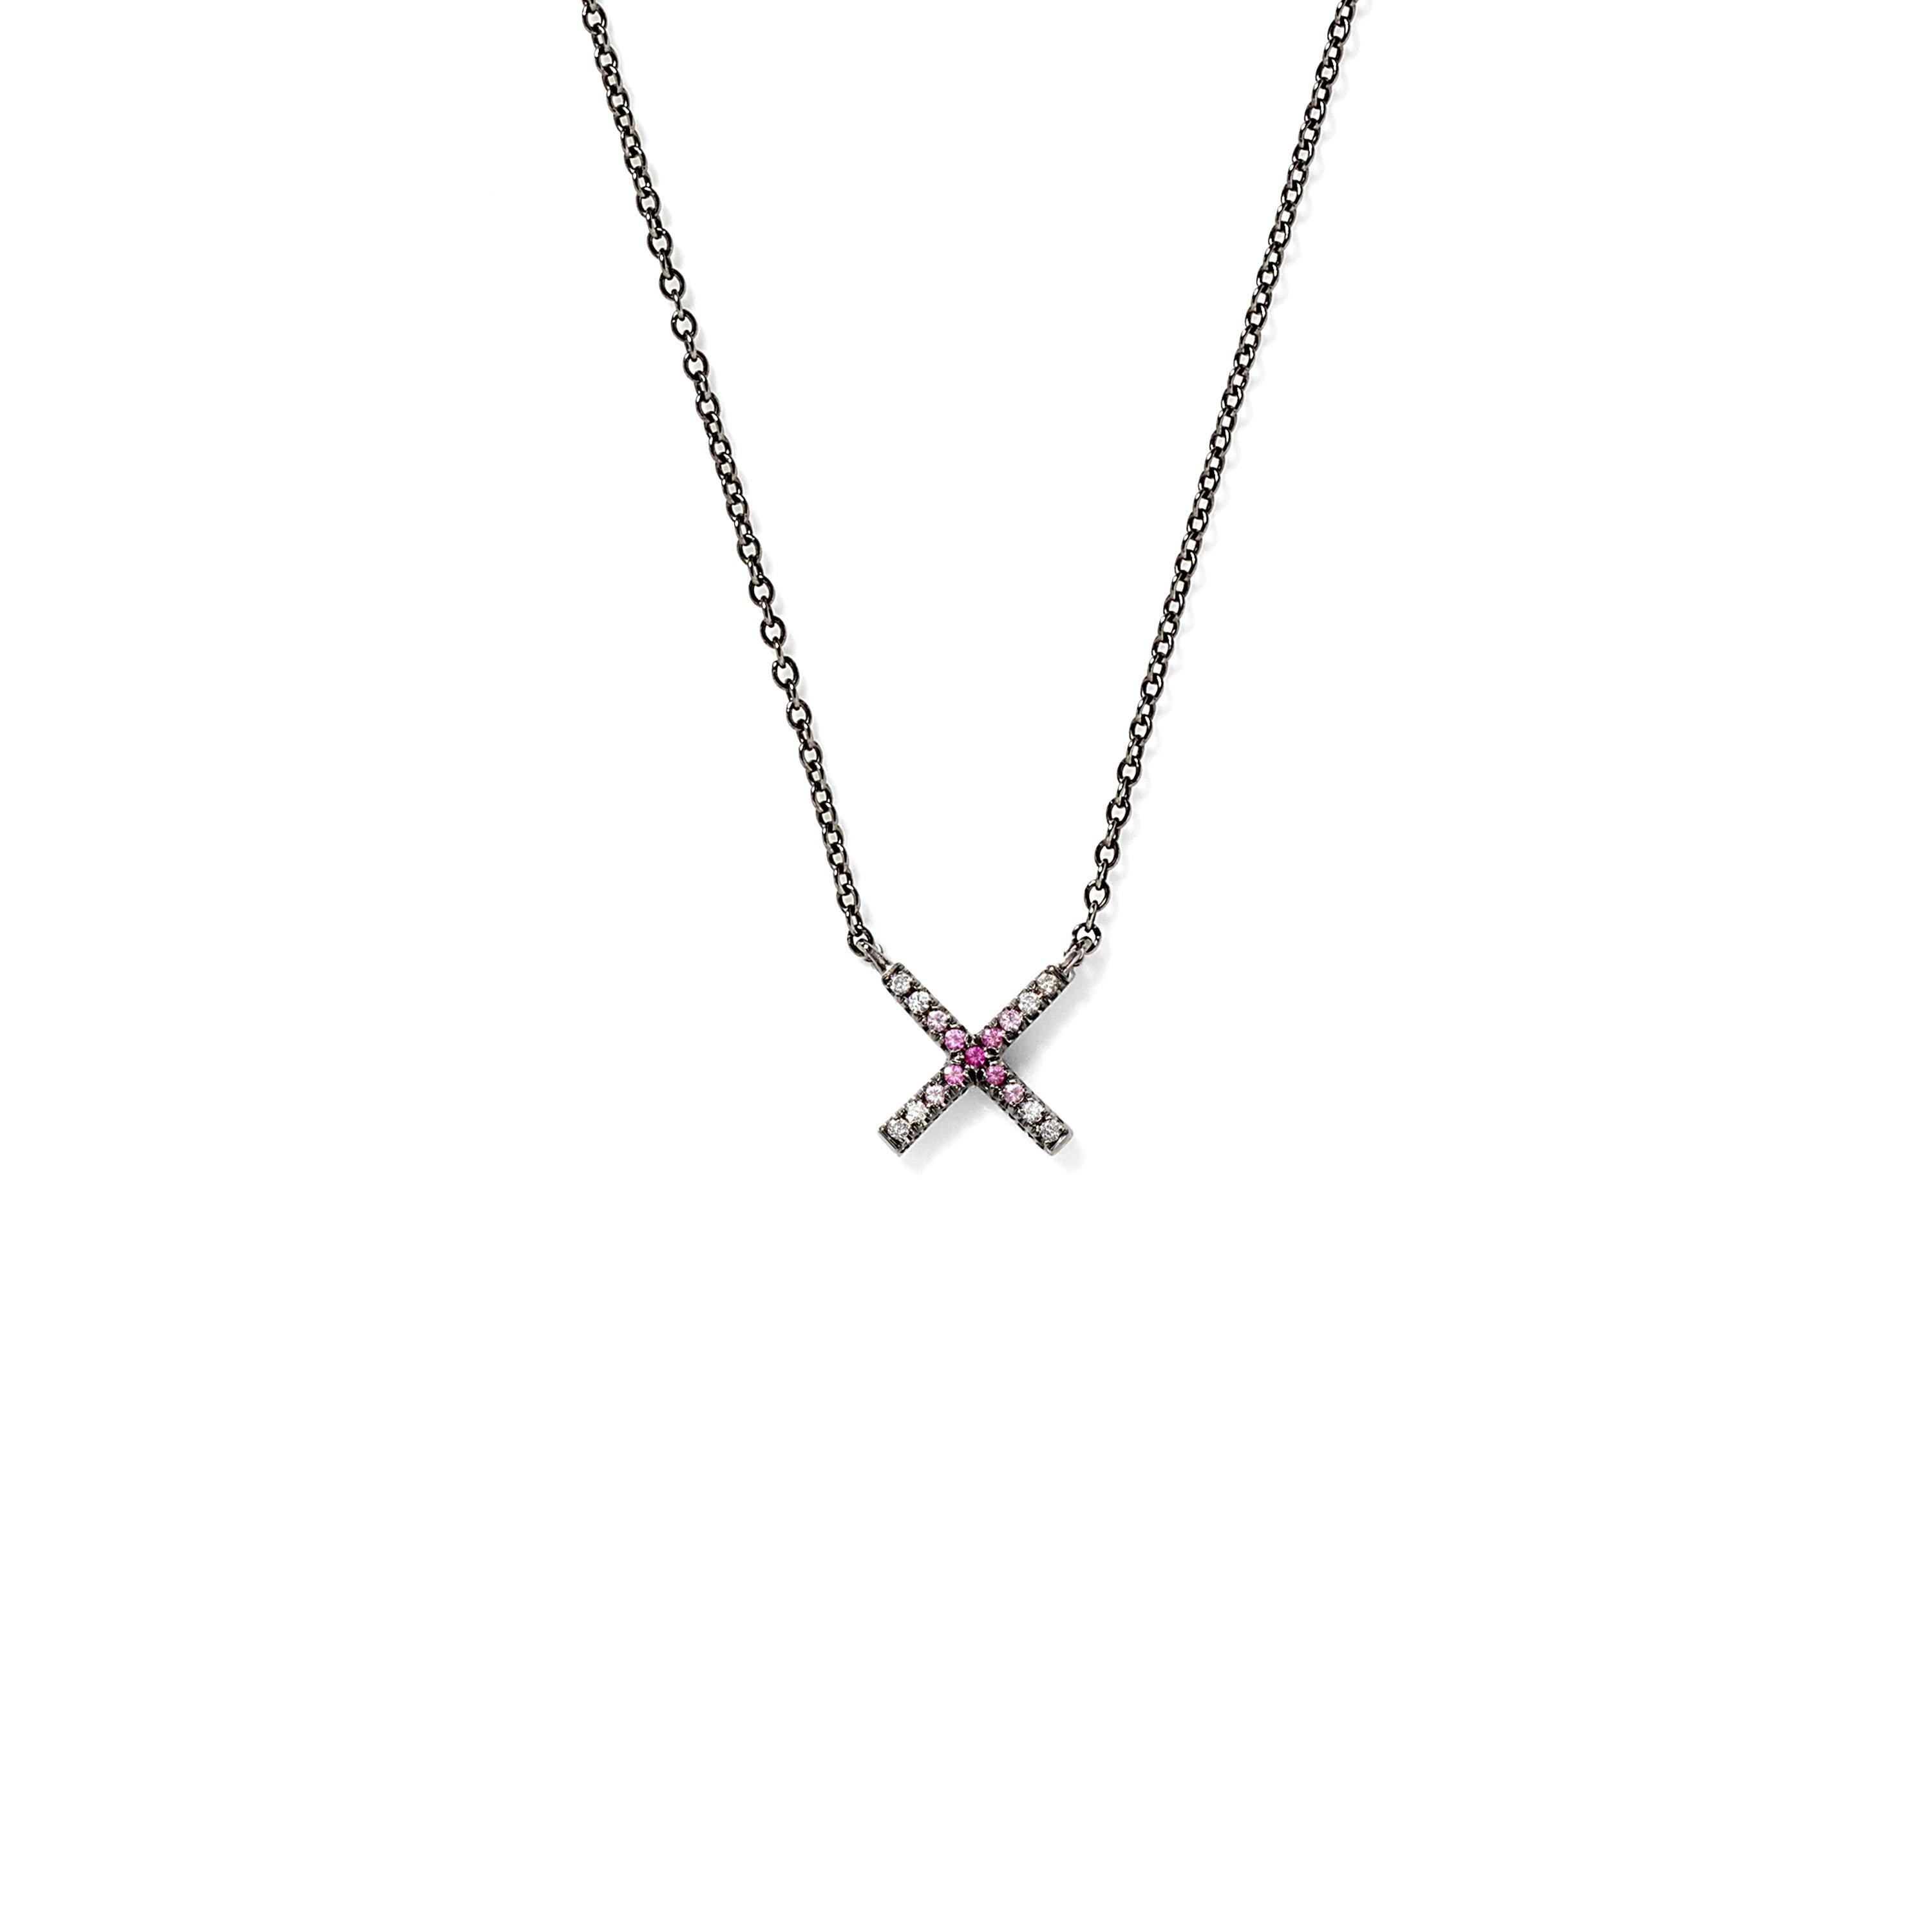 18K Blackened White Gold with Ombré Pink Sapphires and White Diamonds on a blackened white gold chain. The necklace has the signature handmade custom Eva Fehren Clasp with a burnished White Diamond.

Handmade in New York City

The Eva Fehren design